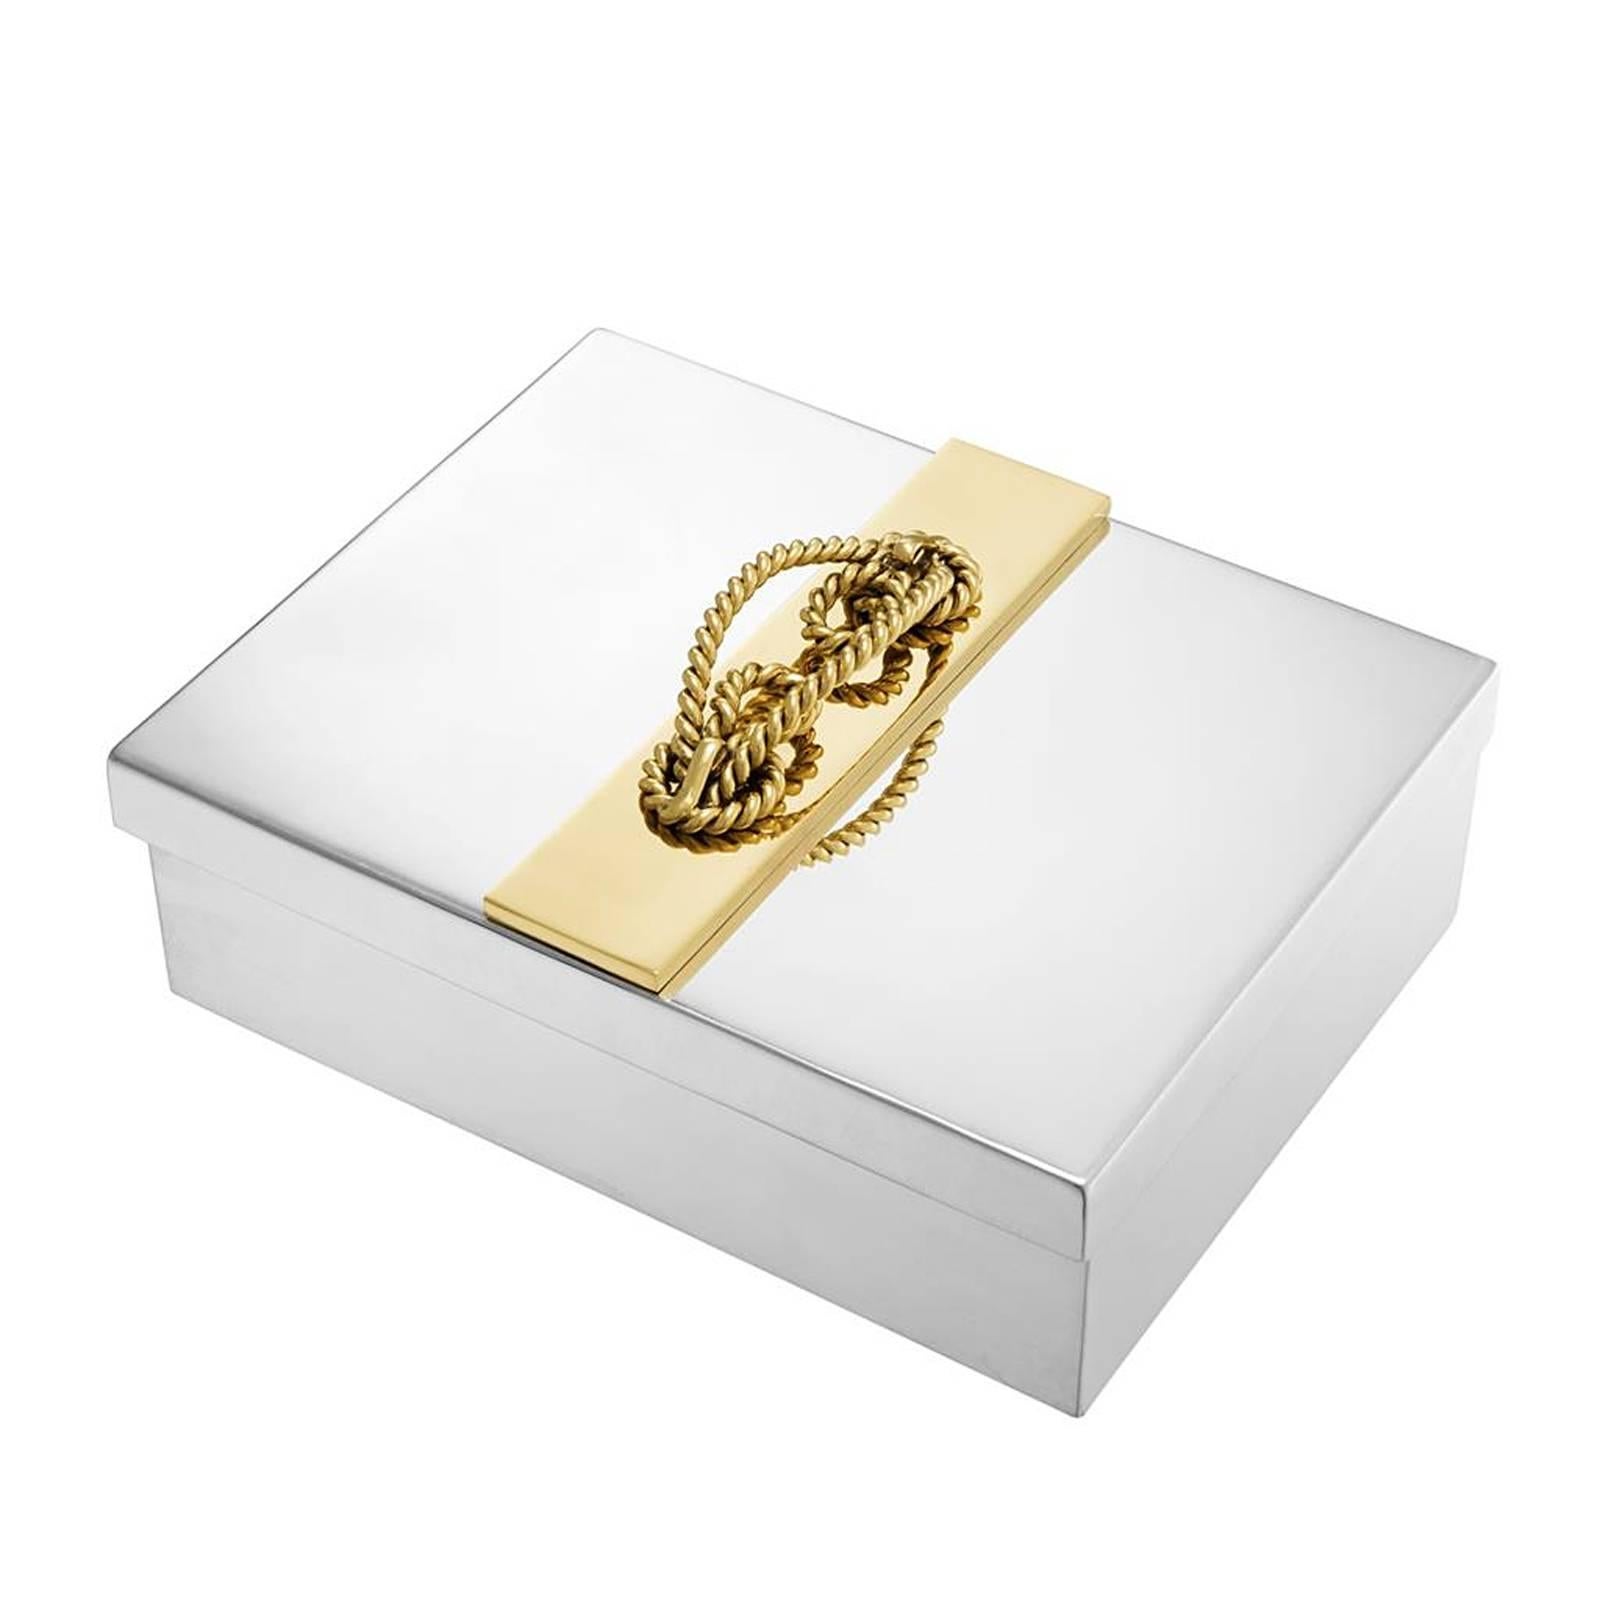 Jewelry box gold knot in polished nickel
finish with gold finish handle.
